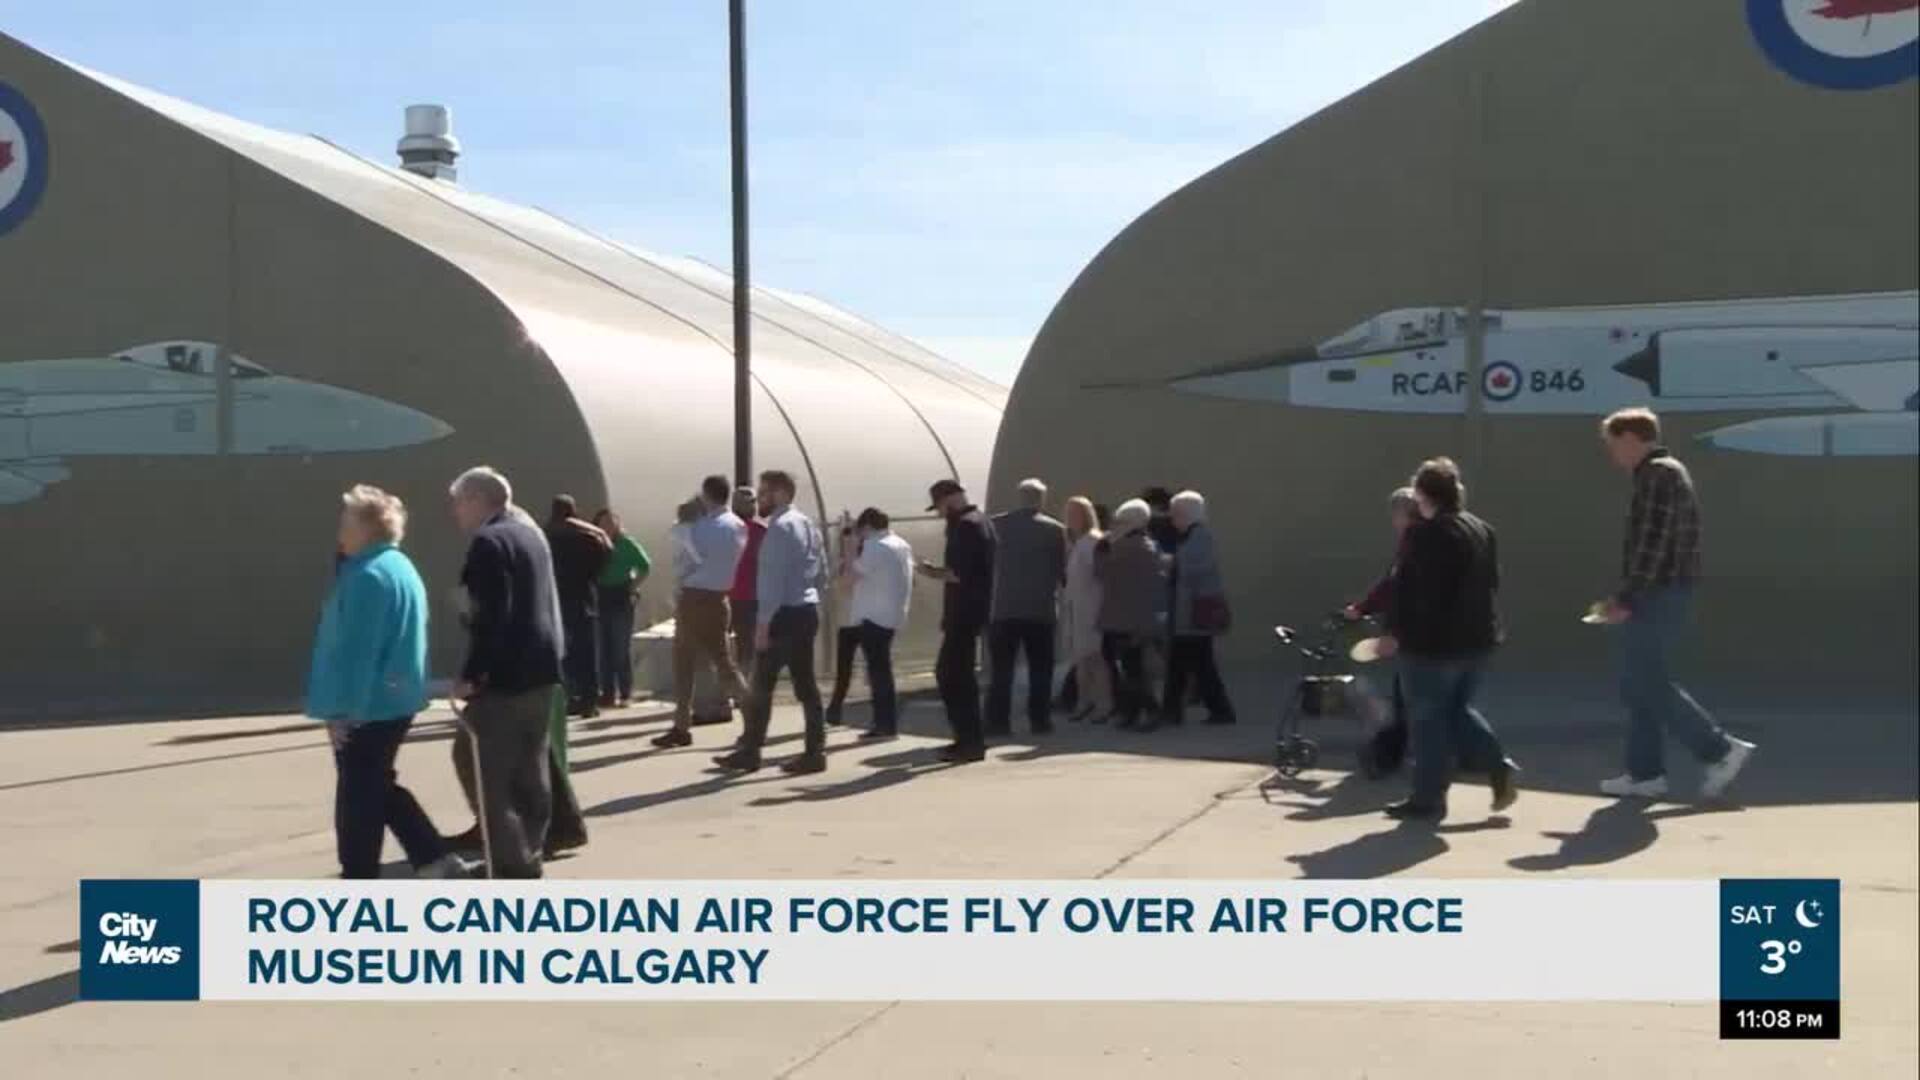 Royal Canadian Air Force fly over Air Force Museum in Calgary